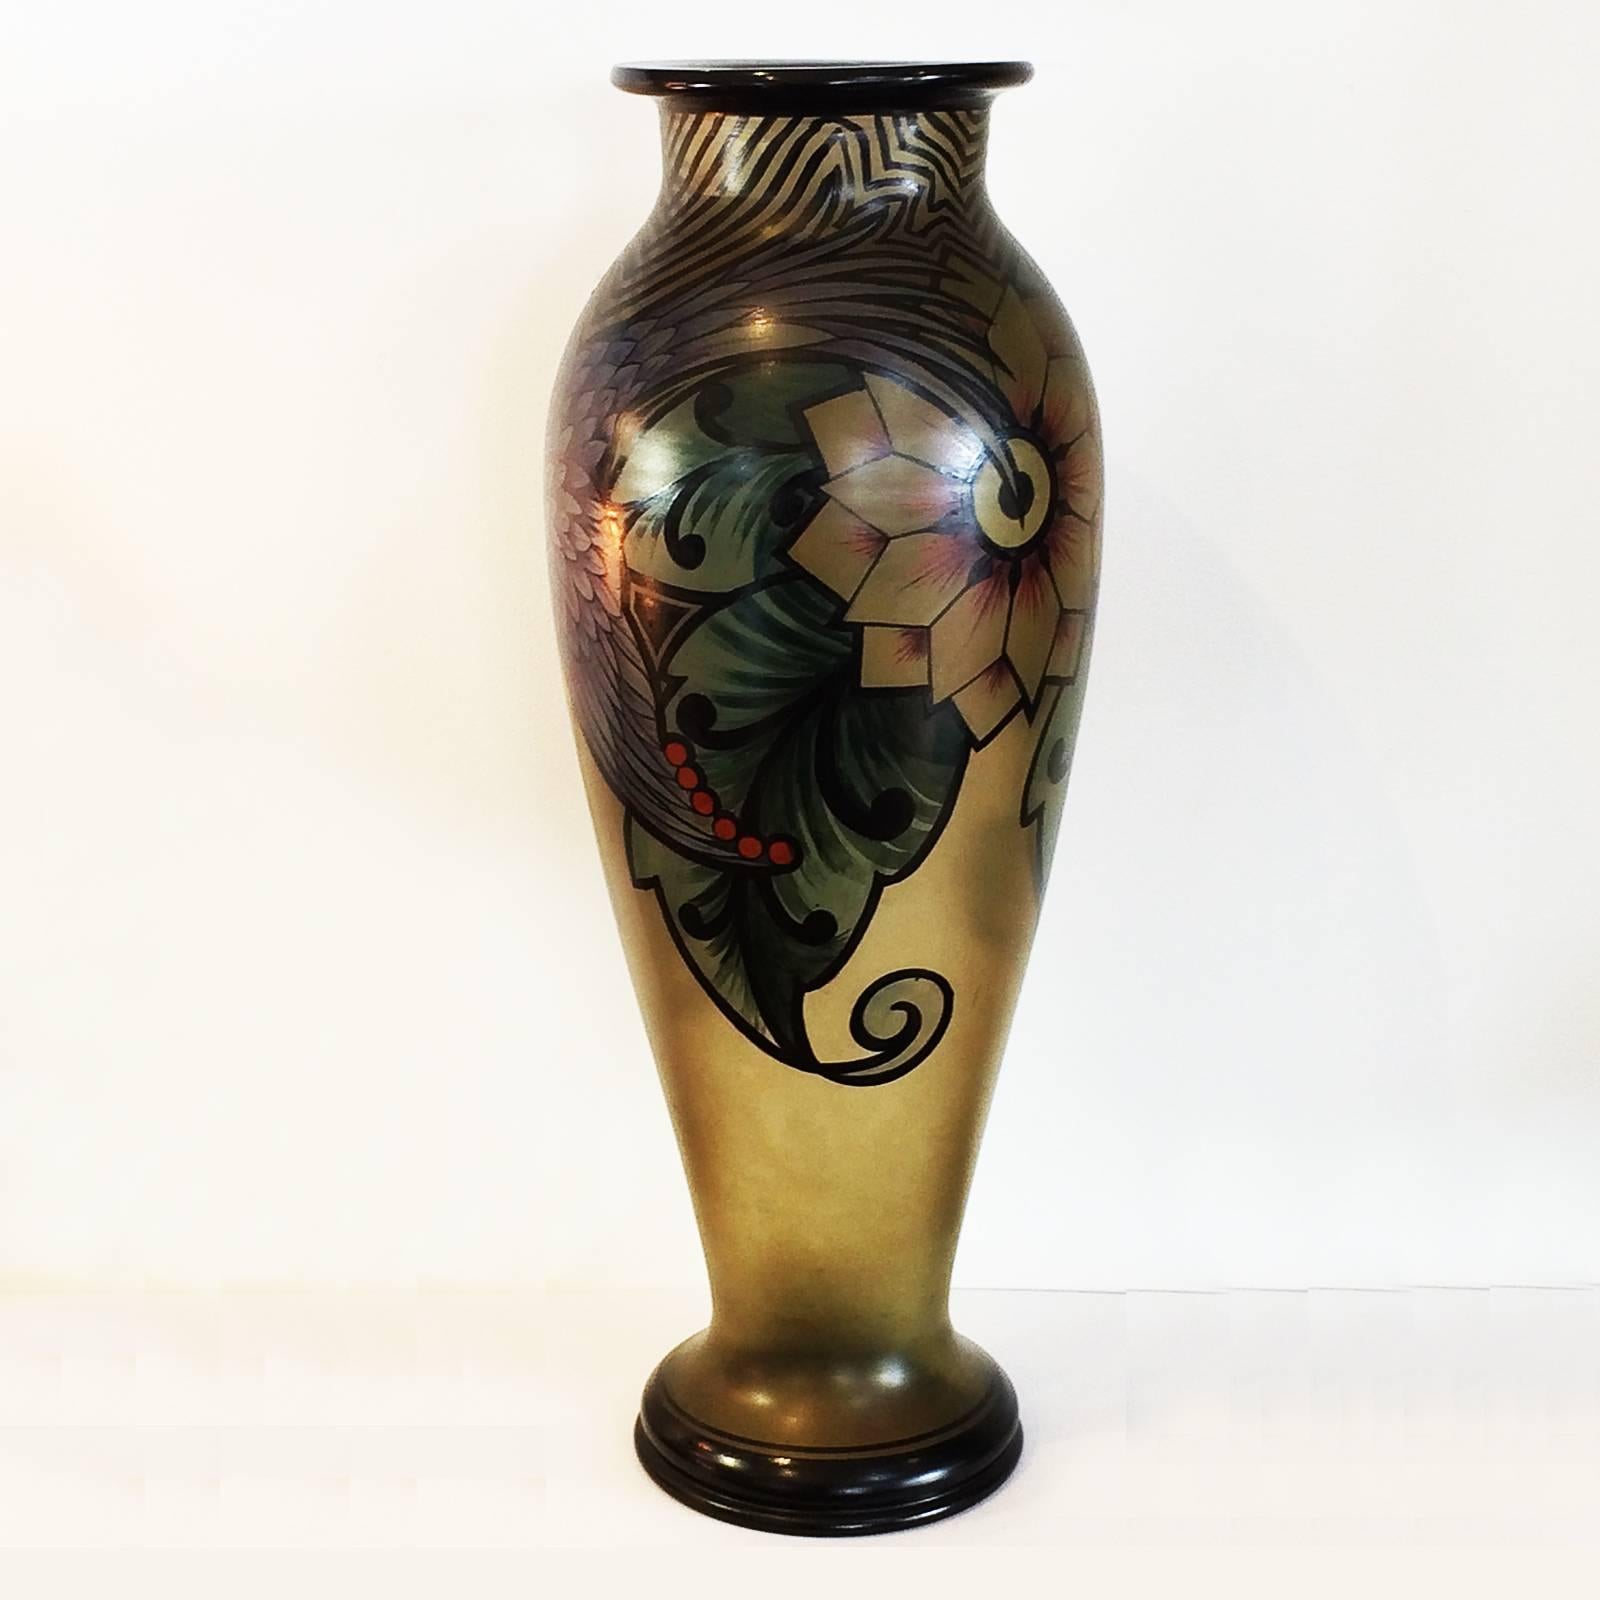 Art Deco, huge French art glass vase, crested bird of paradise by A. Bailly, this is attributed to Alice Bailly who was a painter primarily but known to work on glass in this period. An outstanding design of the bird in a magnificent flower and leaf